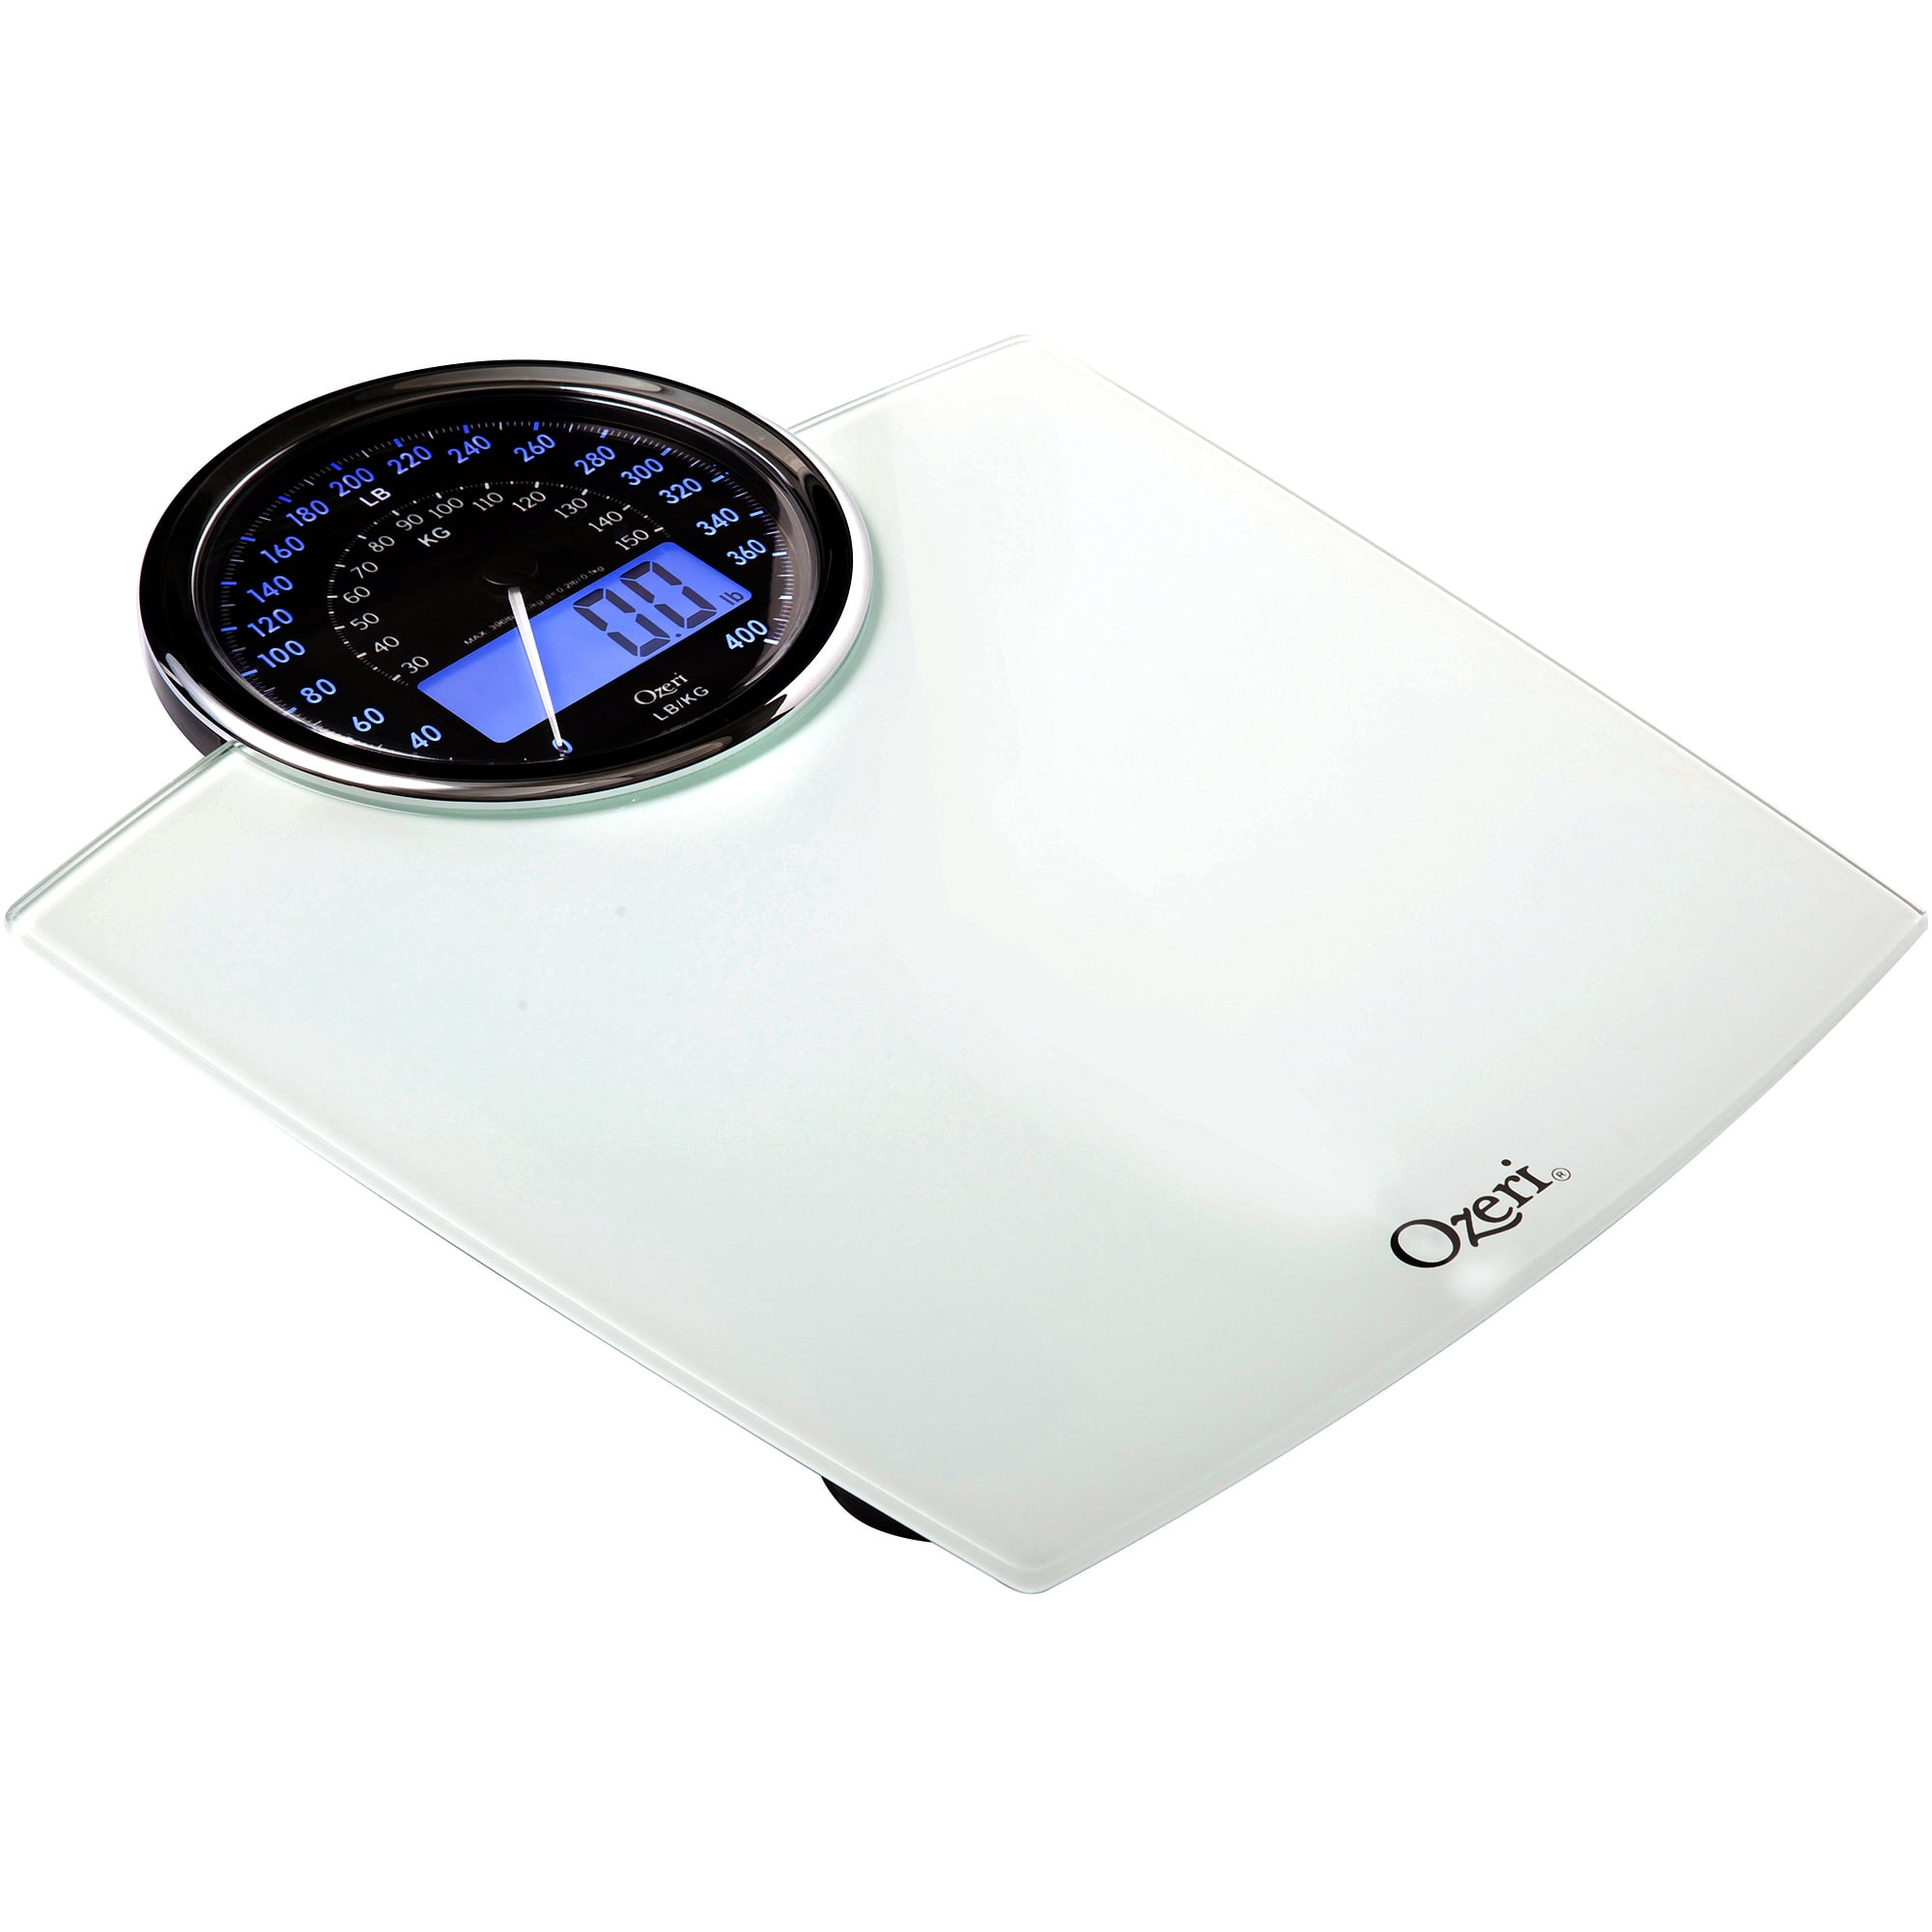  Ozeri Rev 400 lbs (180 kg) Bathroom Scale with Electro-Mechanical  Weight Dial and 50 gram Sensor Technology (0.1 lbs / 0.05 kg) : Health &  Personal Care